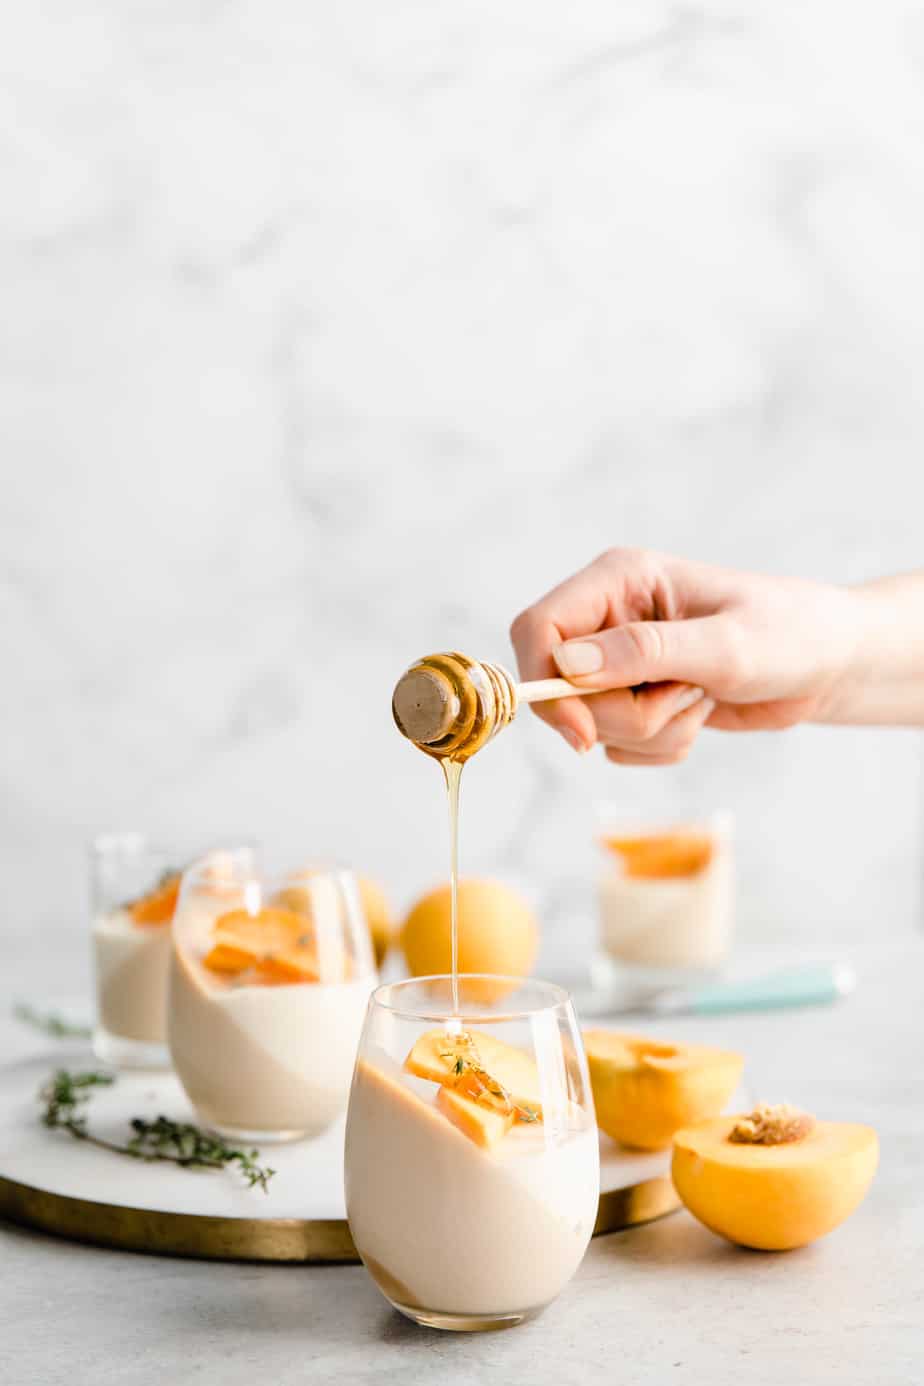 Rooibos & Vanilla Panna Cotta with peaches and thyme.